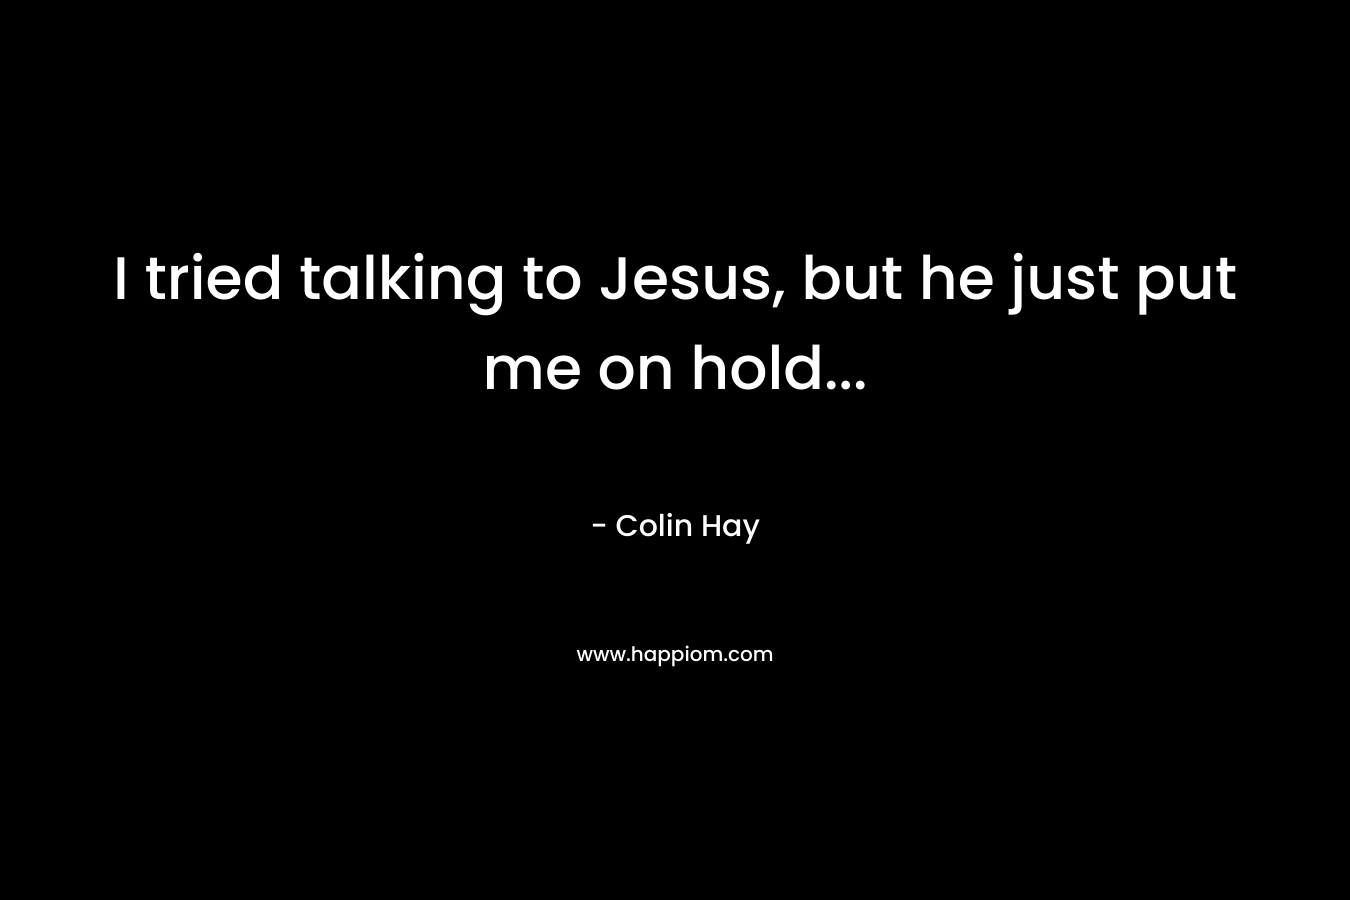 I tried talking to Jesus, but he just put me on hold...